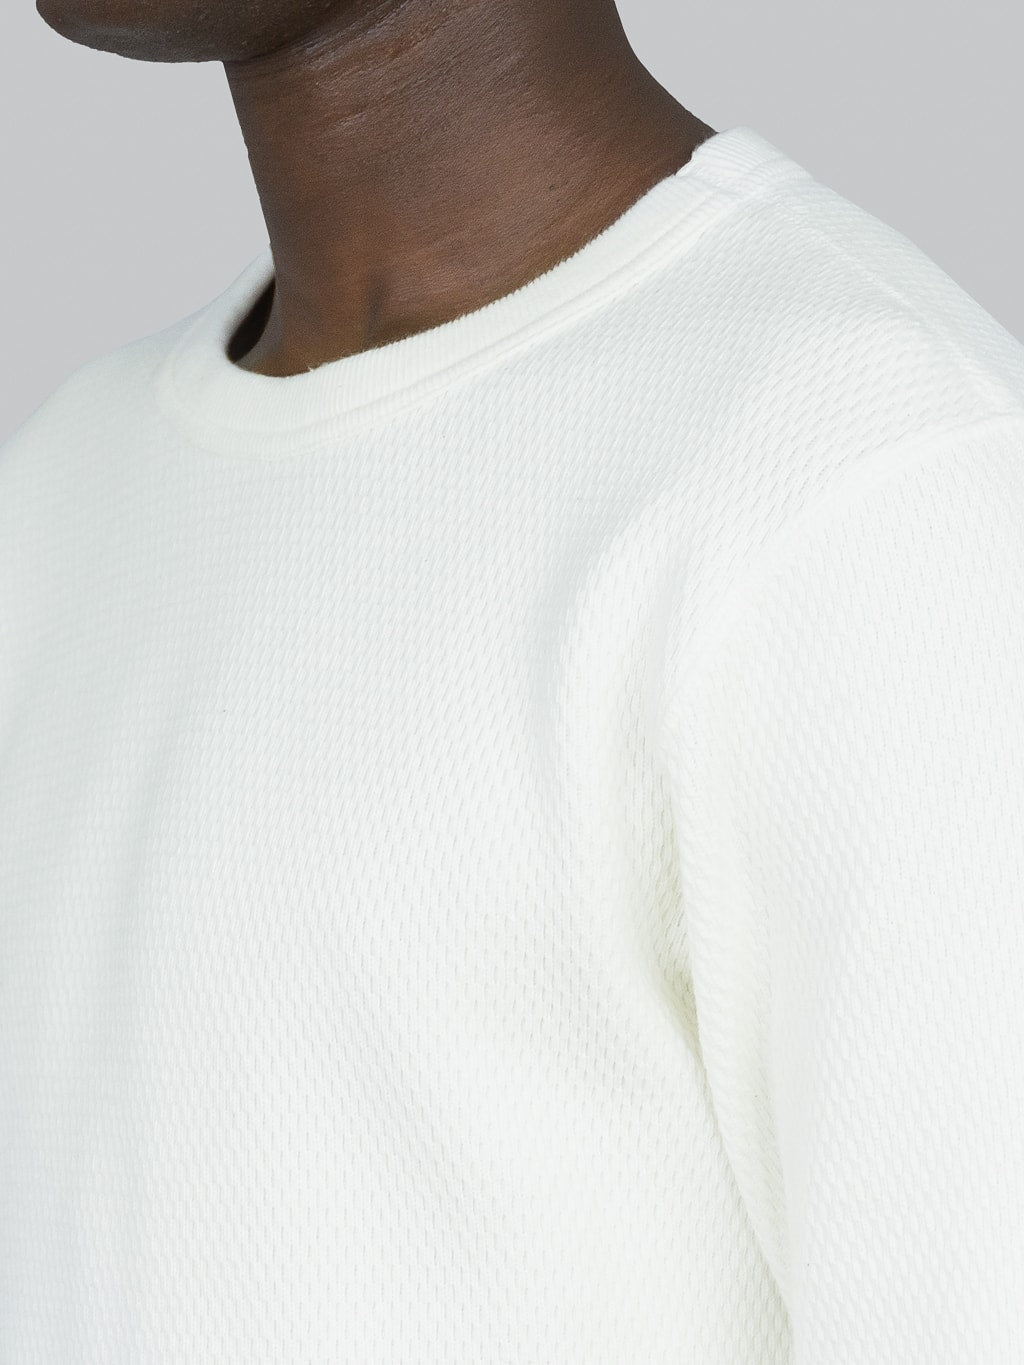 UES Double Honeycomb Thermal tshirt Off White crewneck collar